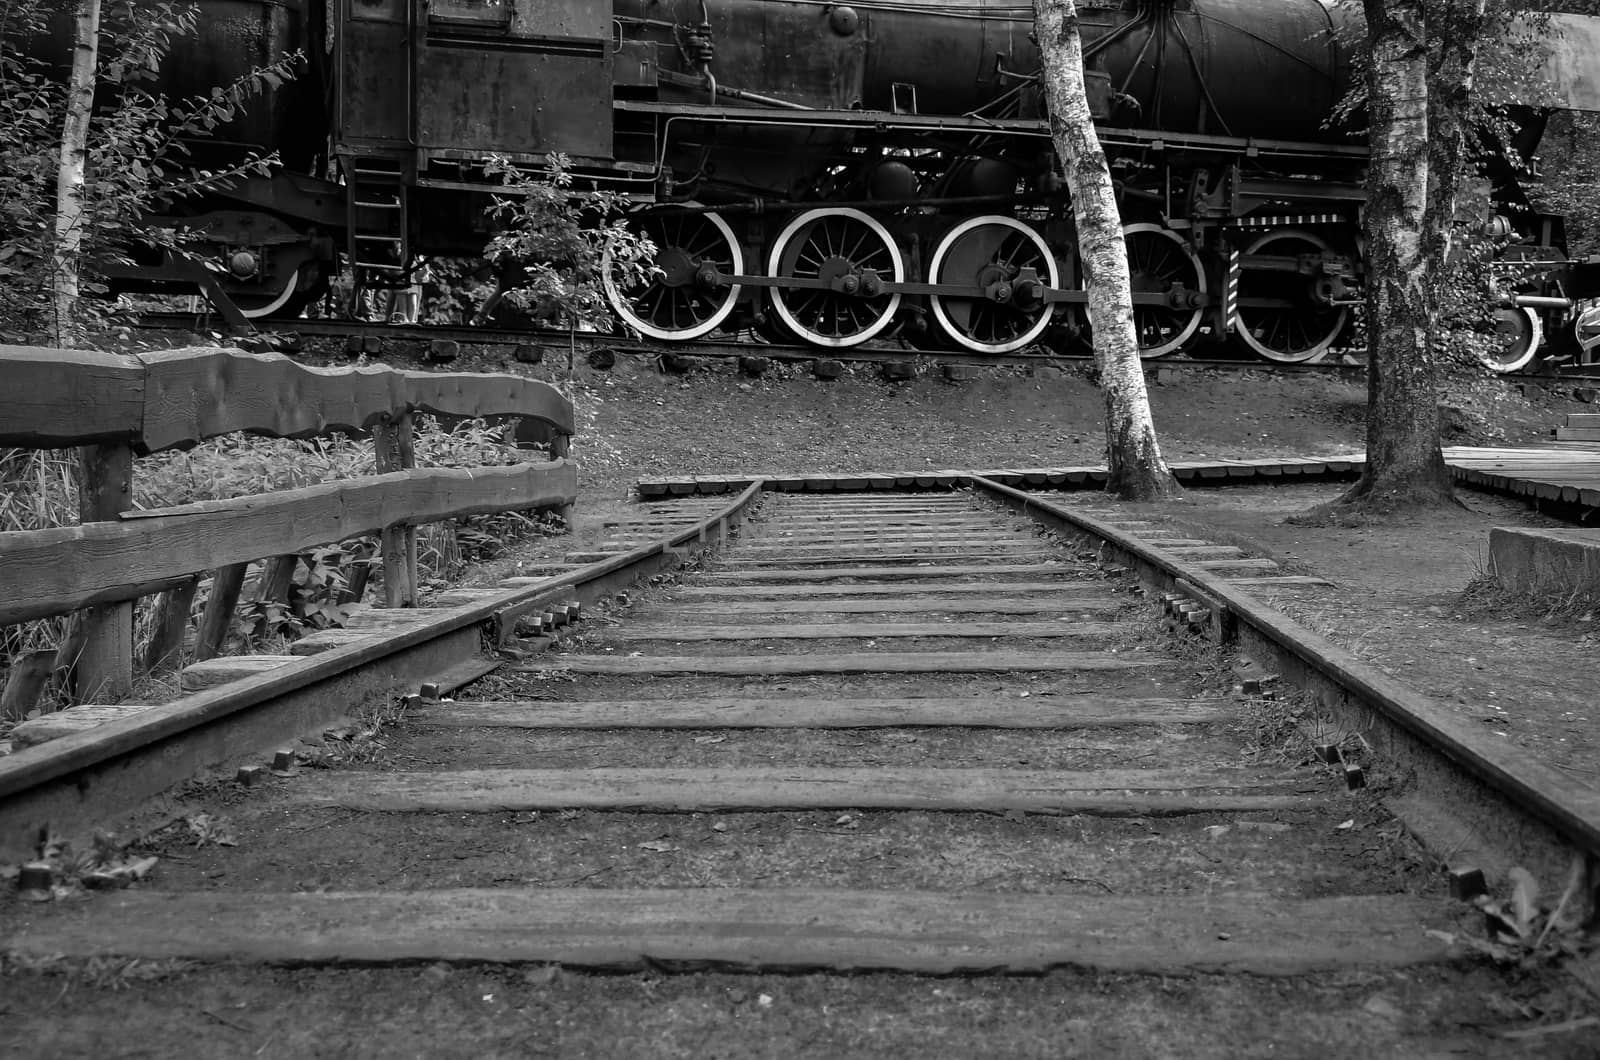 End of Train tracks against old steam locomotive in black and white photo